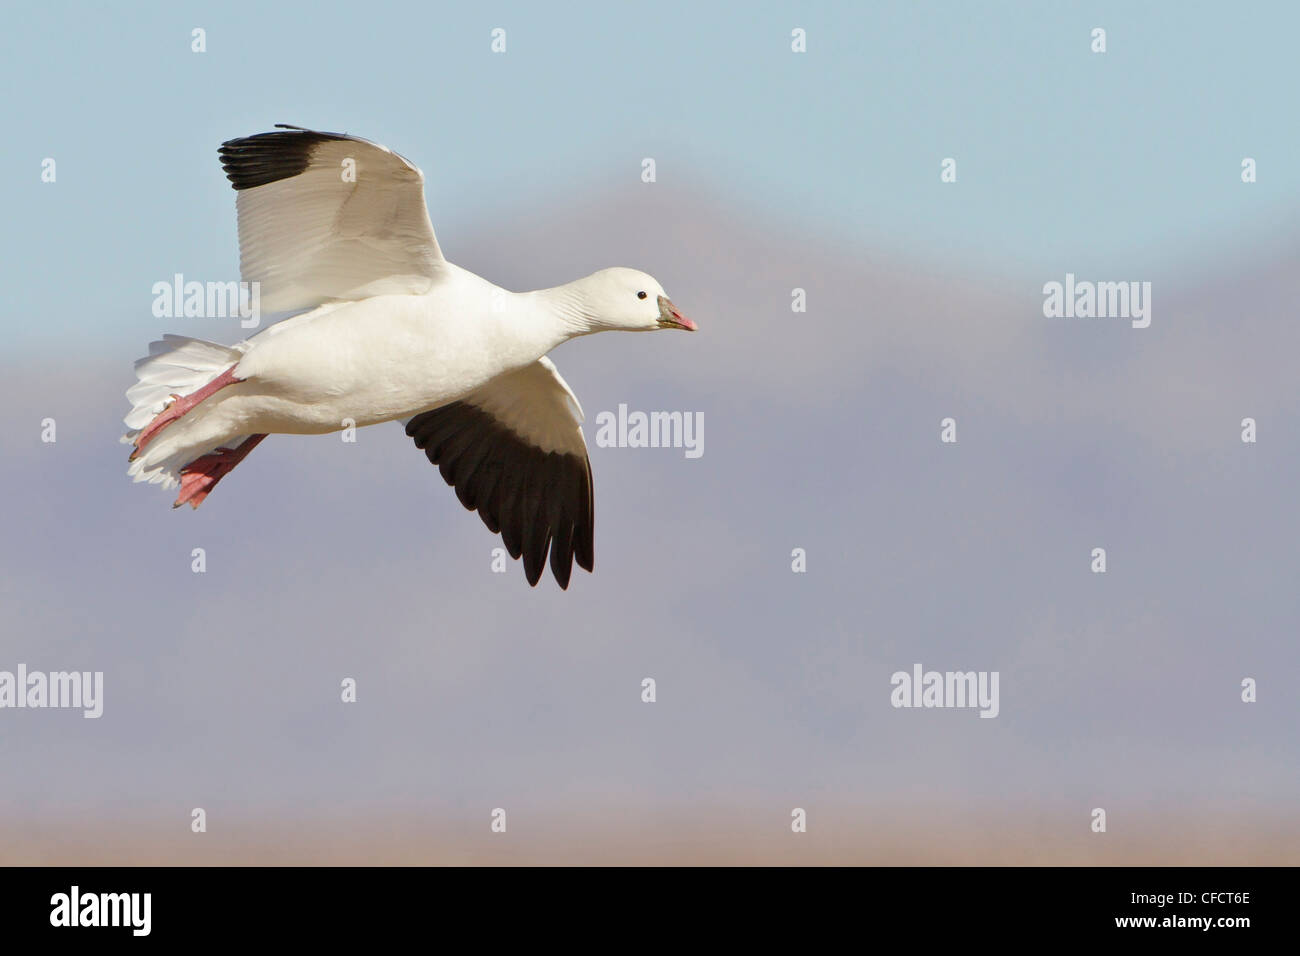 Ross's Goose (Chen rossii) flying at the Bosque del Apache wildlife refuge near Socorro, New Mexico, United States of America. Stock Photo